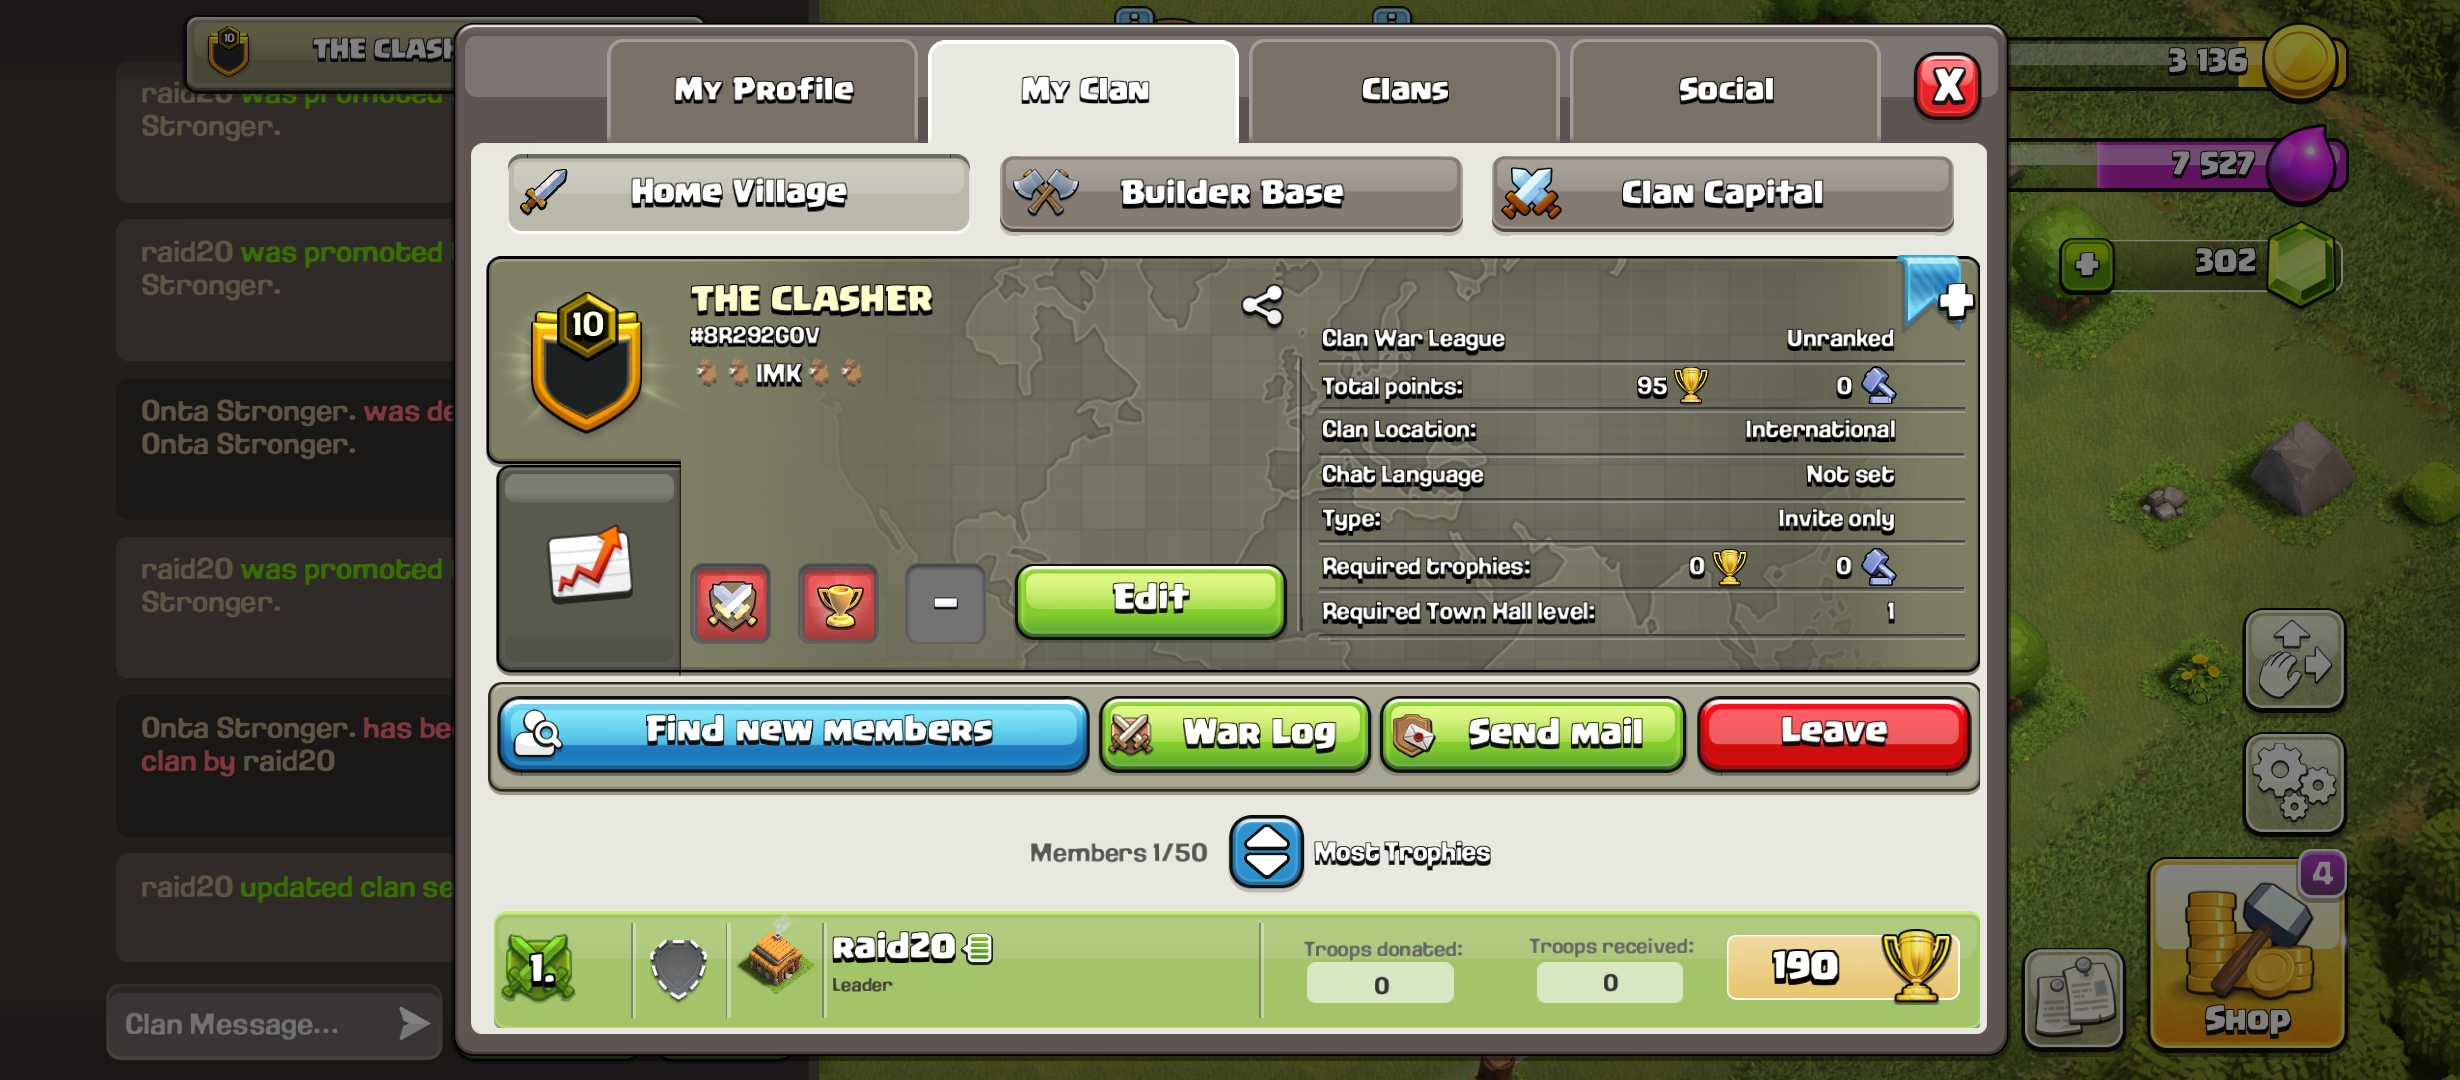 Clan Level 10 | Name : THE CLASHER | W 141 , L 137 | League : Unranked | Capital Hall 1